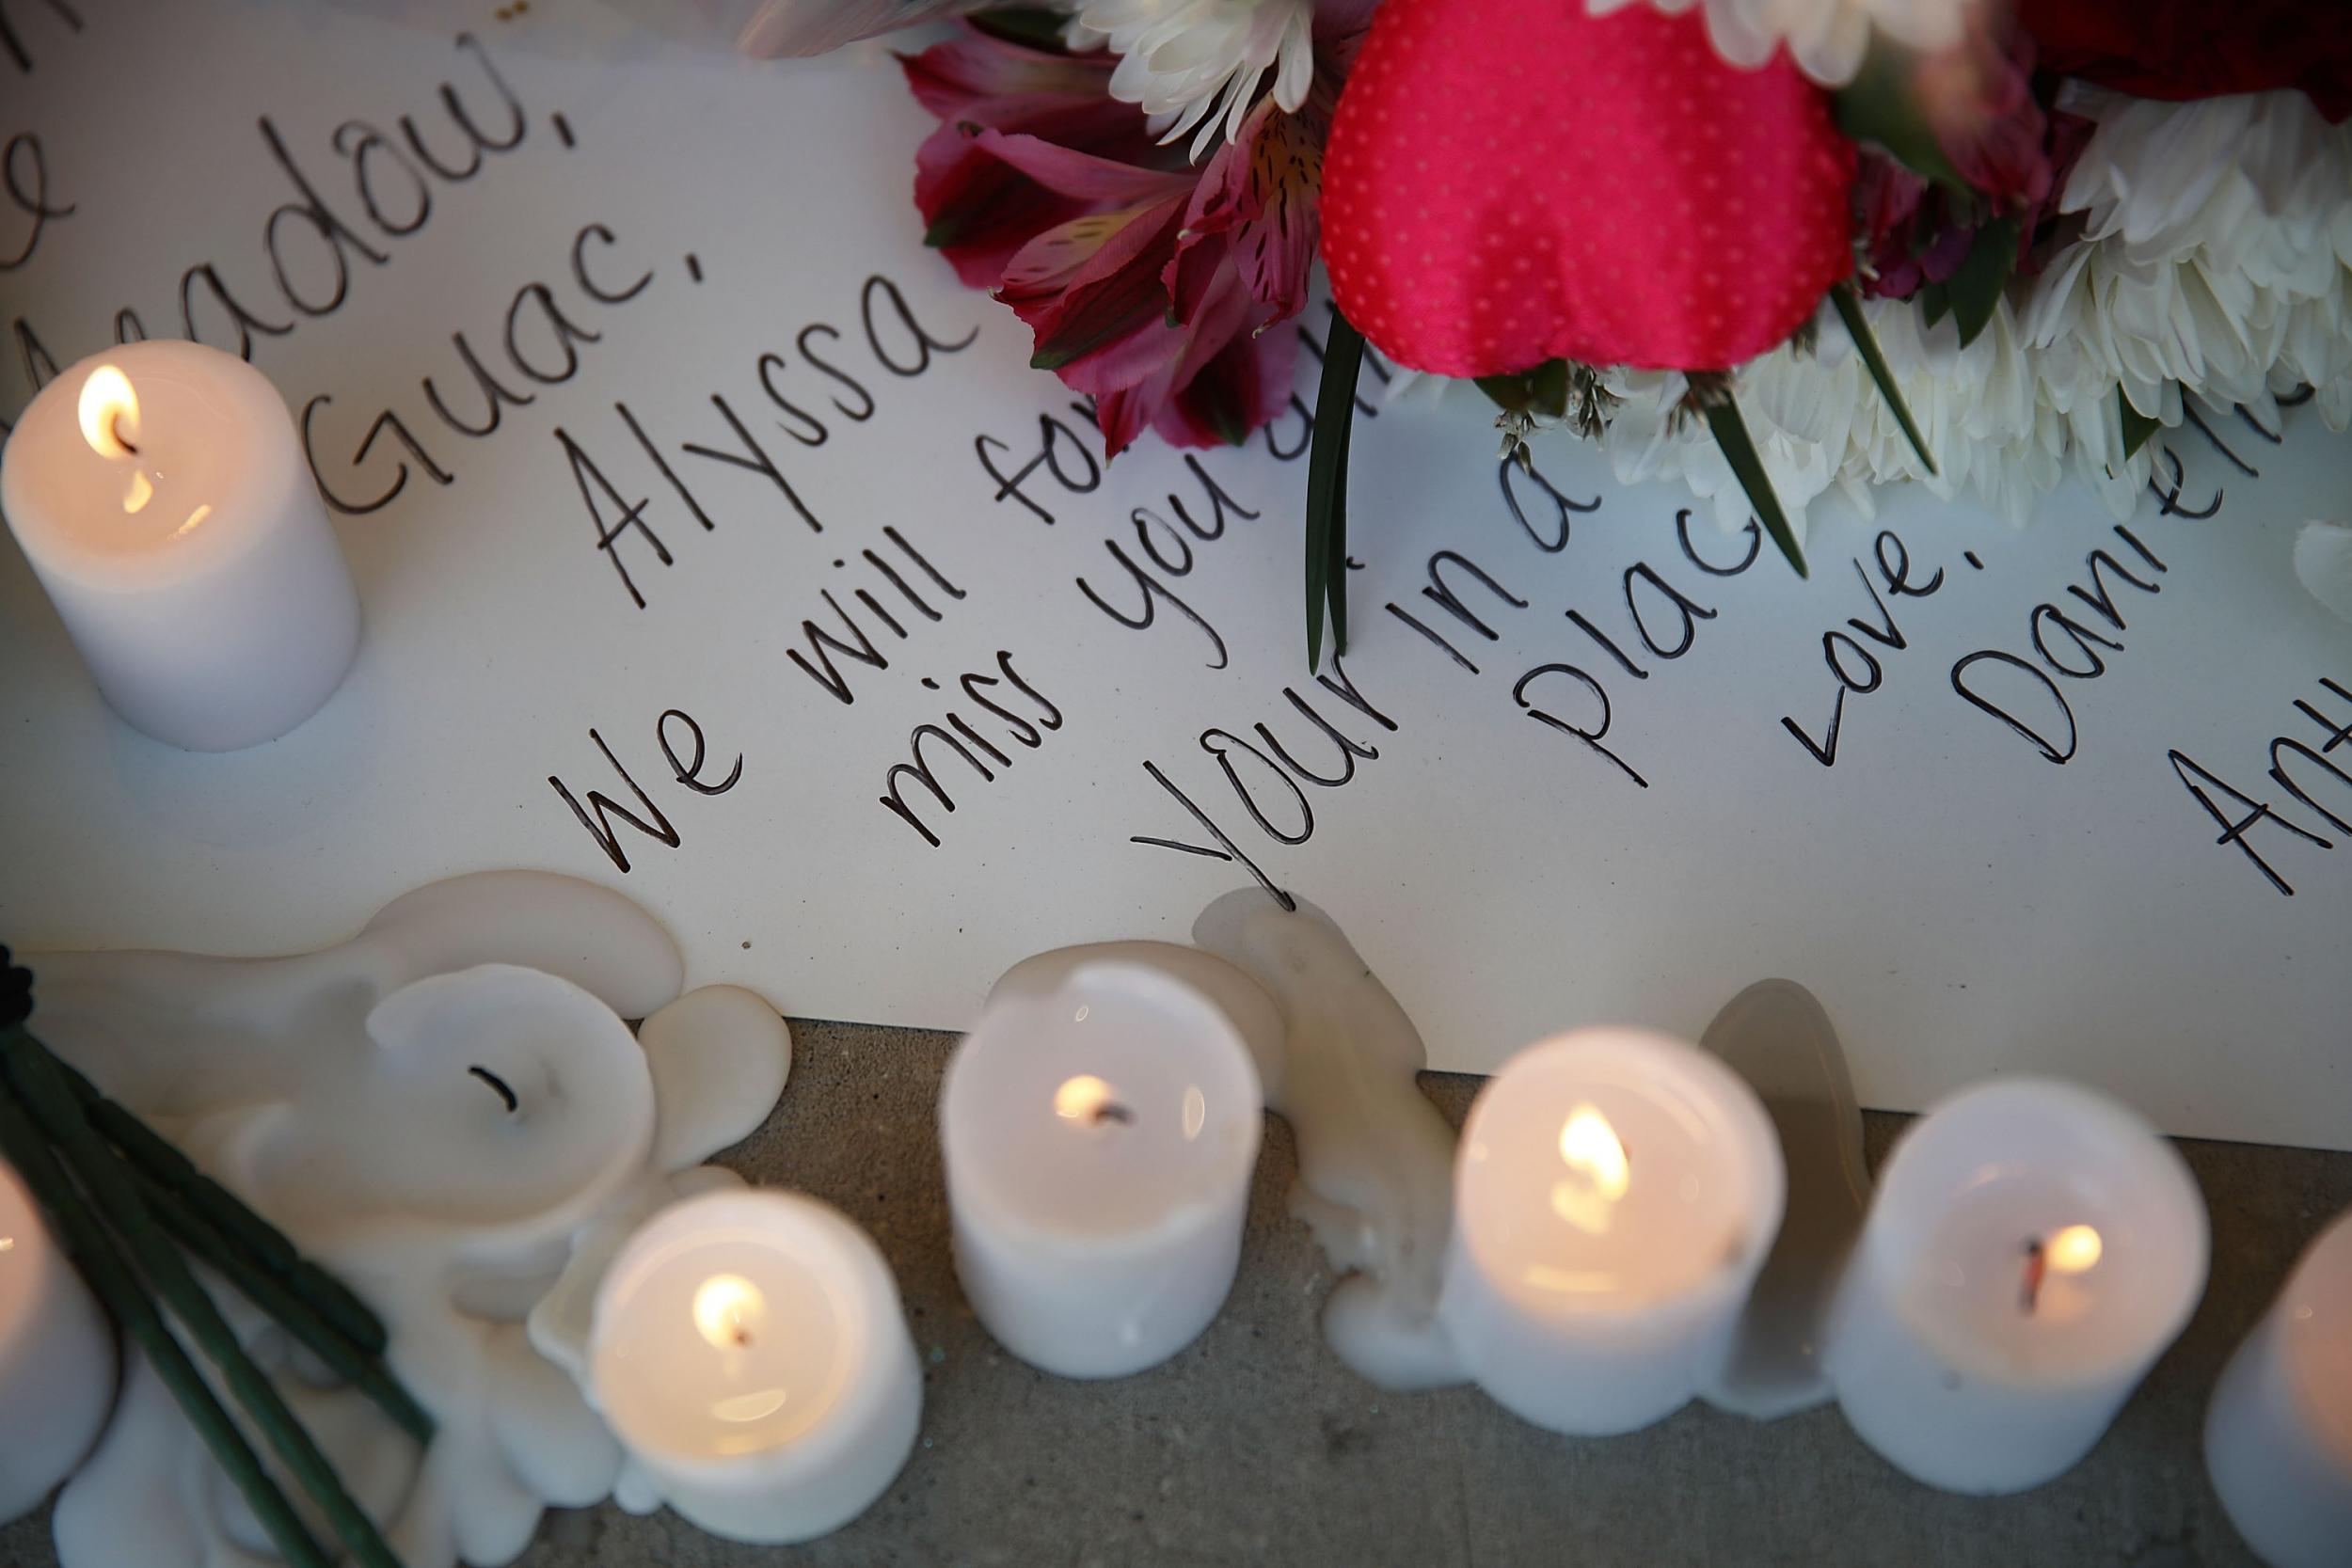 A note is seen left in a memorial setup during a service for the victims of the shooting at Marjory Stoneman Douglas High Schoo